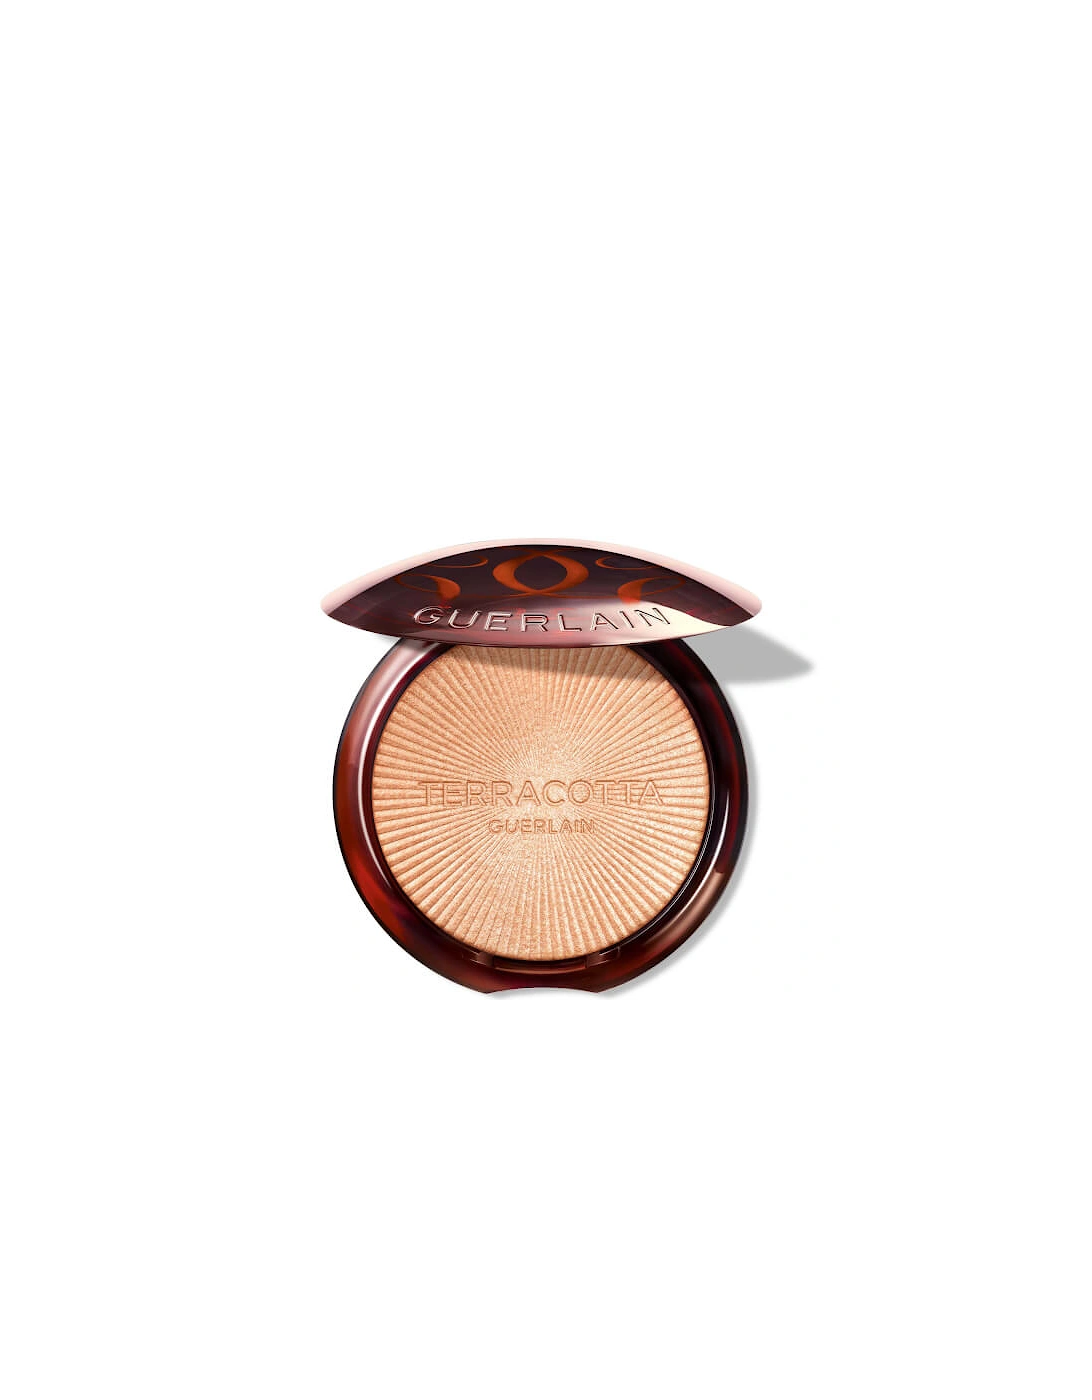 Terracotta Luminizer The Shimmering Powder Highlighting and Golden Glow - Cool Ivory, 2 of 1